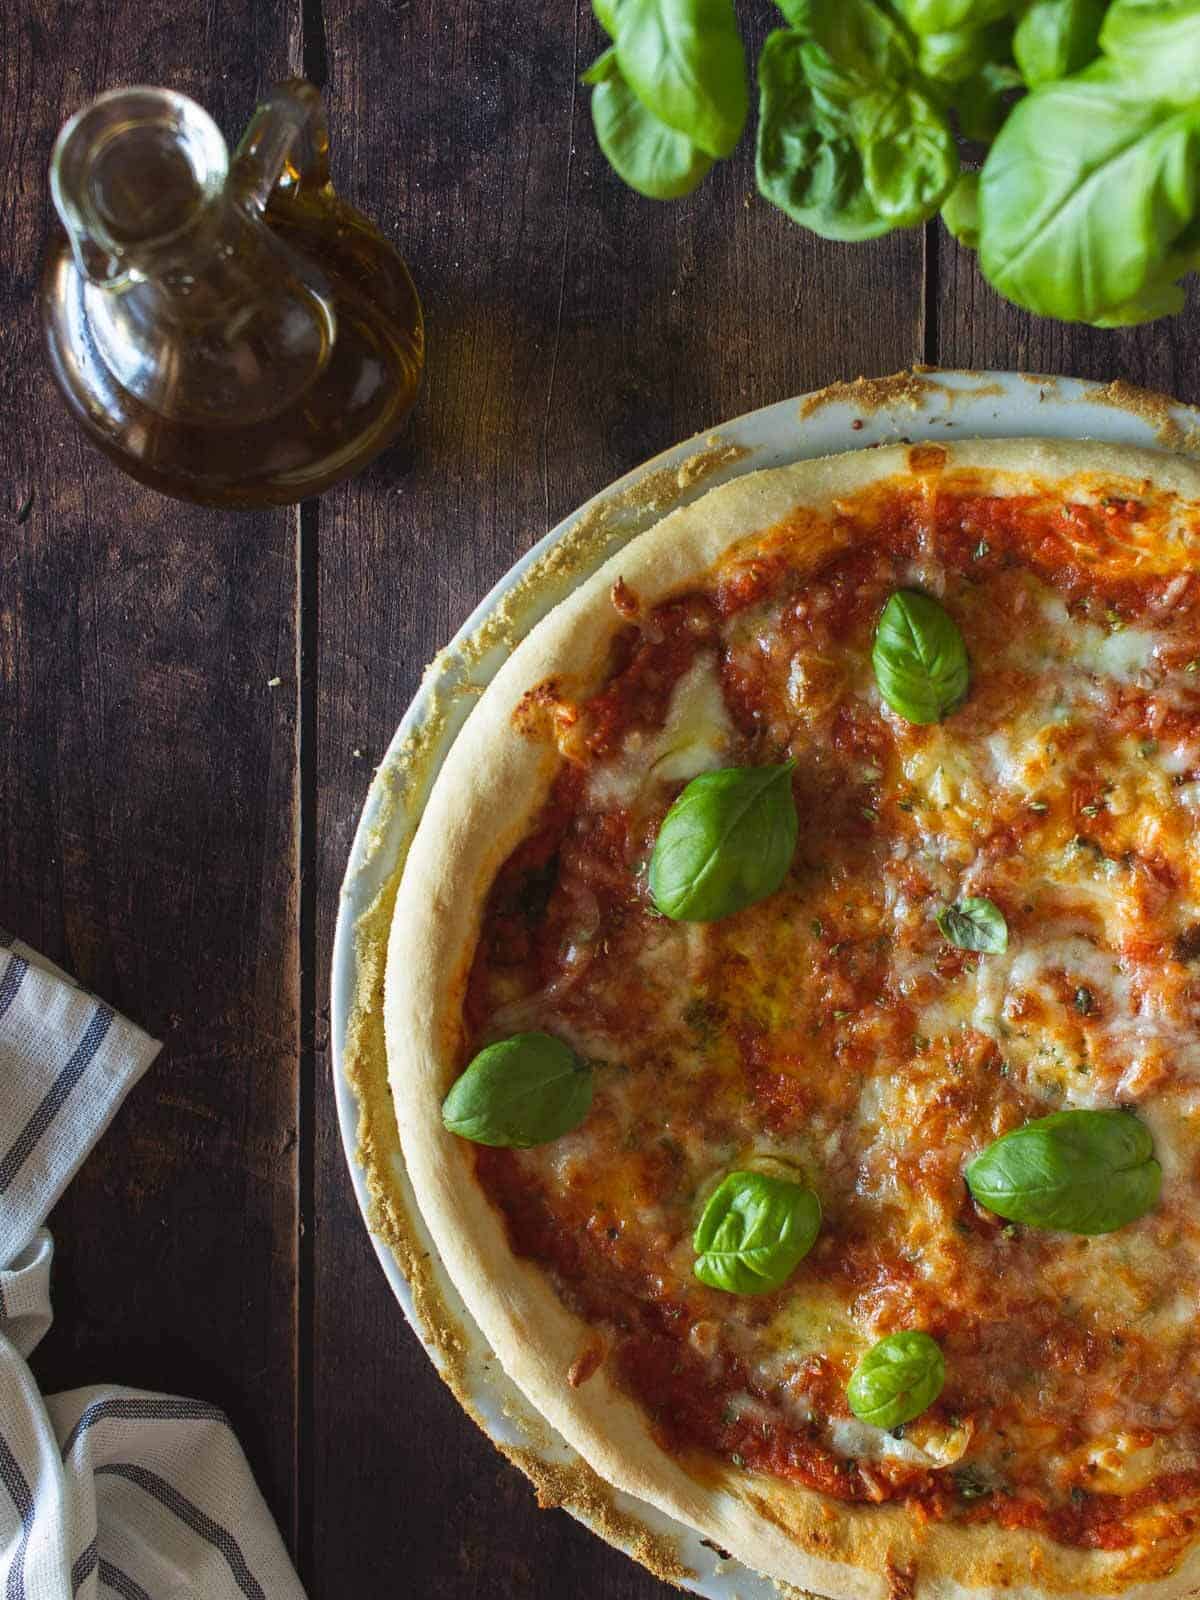 pizza made with our vegan pizza dough recipe and topped with fresh basil and vegan mozzarella.